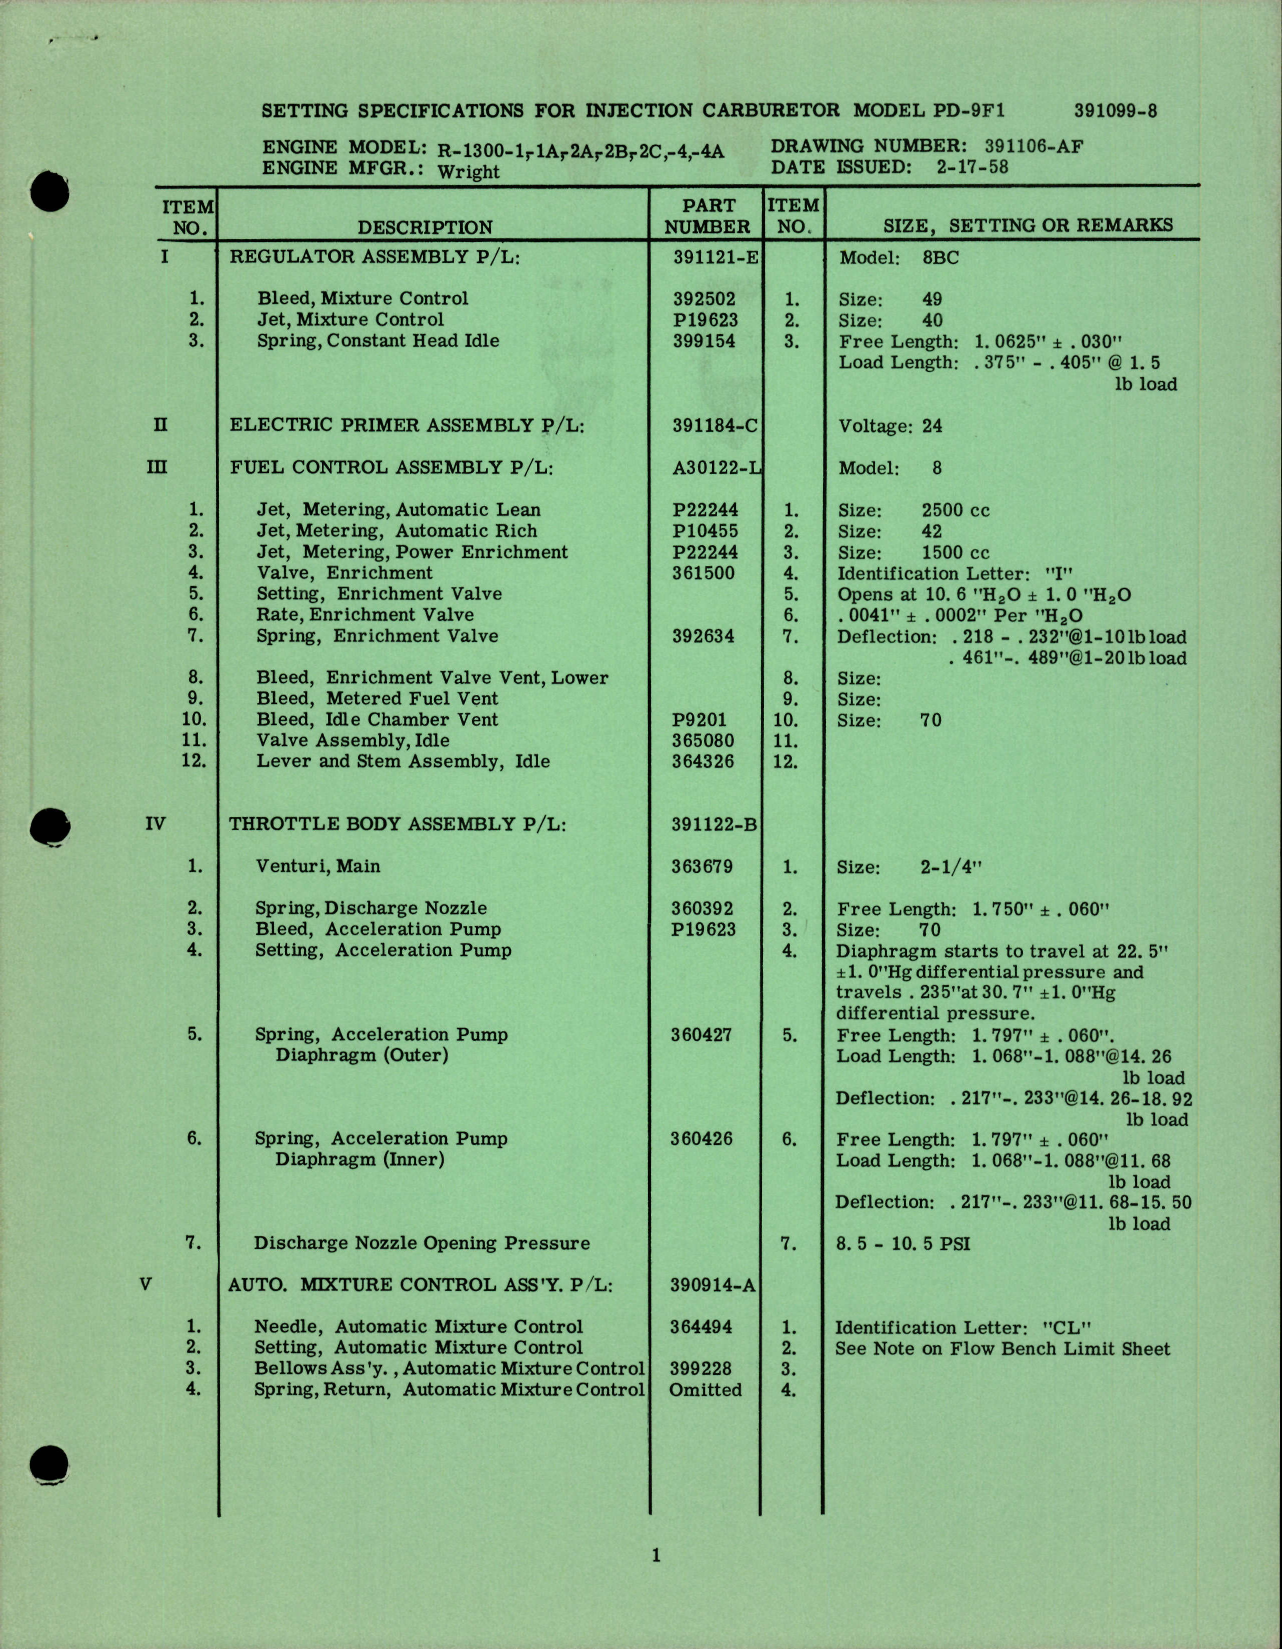 Sample page 1 from AirCorps Library document: Setting Specification s for Injection Carburetor Model PD-9F1